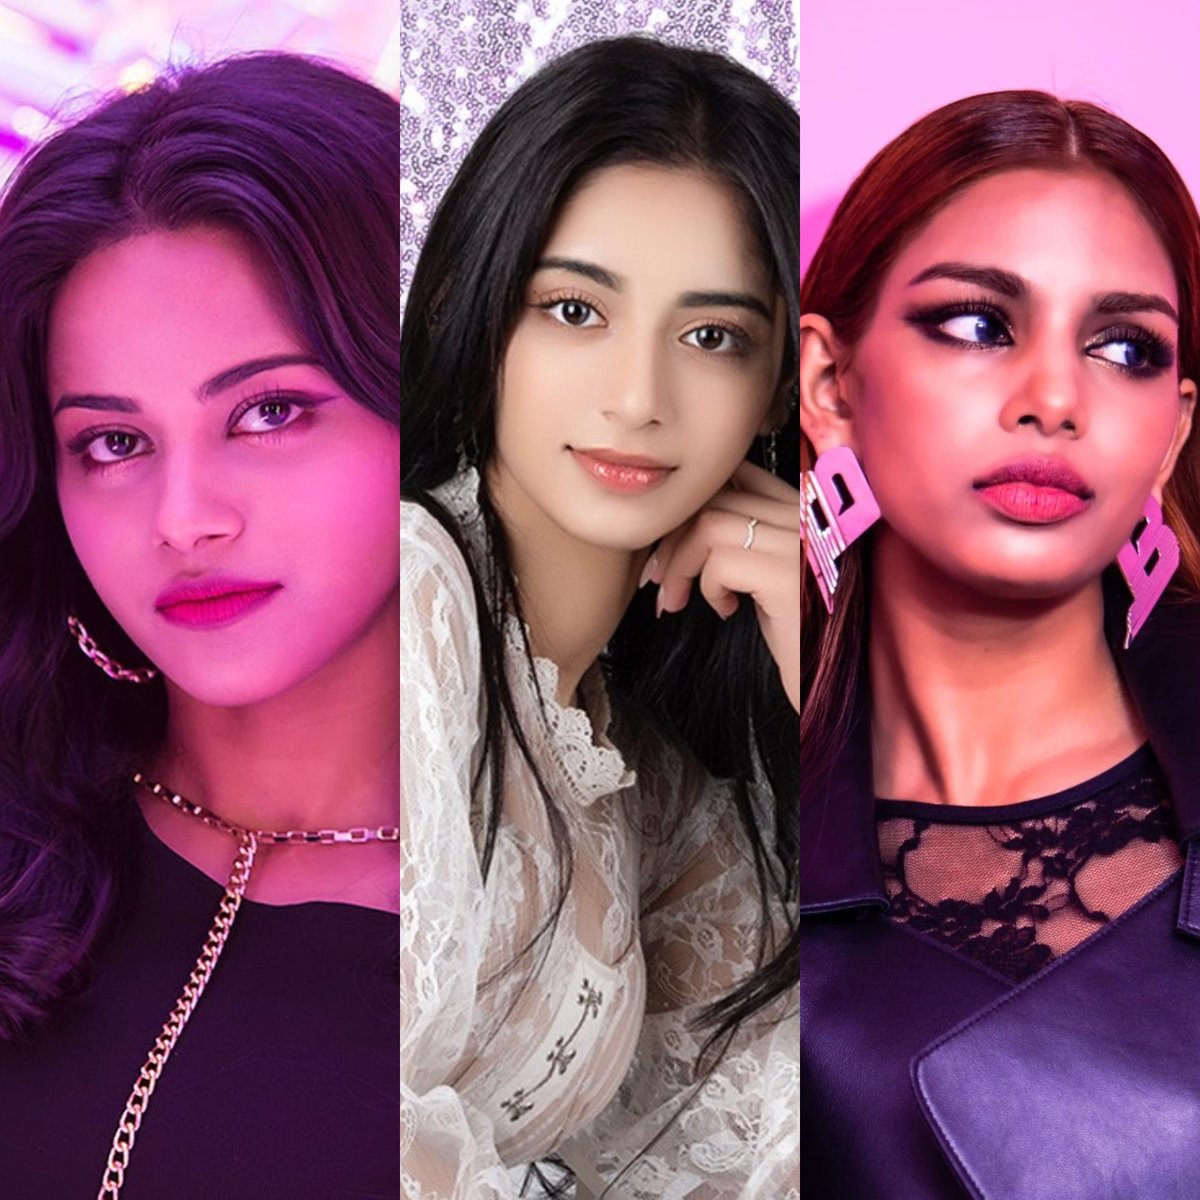 Priyanka (Z-Girls), Aria (X:IN) and Sriya (BLACKSWAN) were mentioned by Indian Ambassador to South Korea Amit Kumar in a interview discussing the 50th anniversary of diplomatic relations between Korea and India